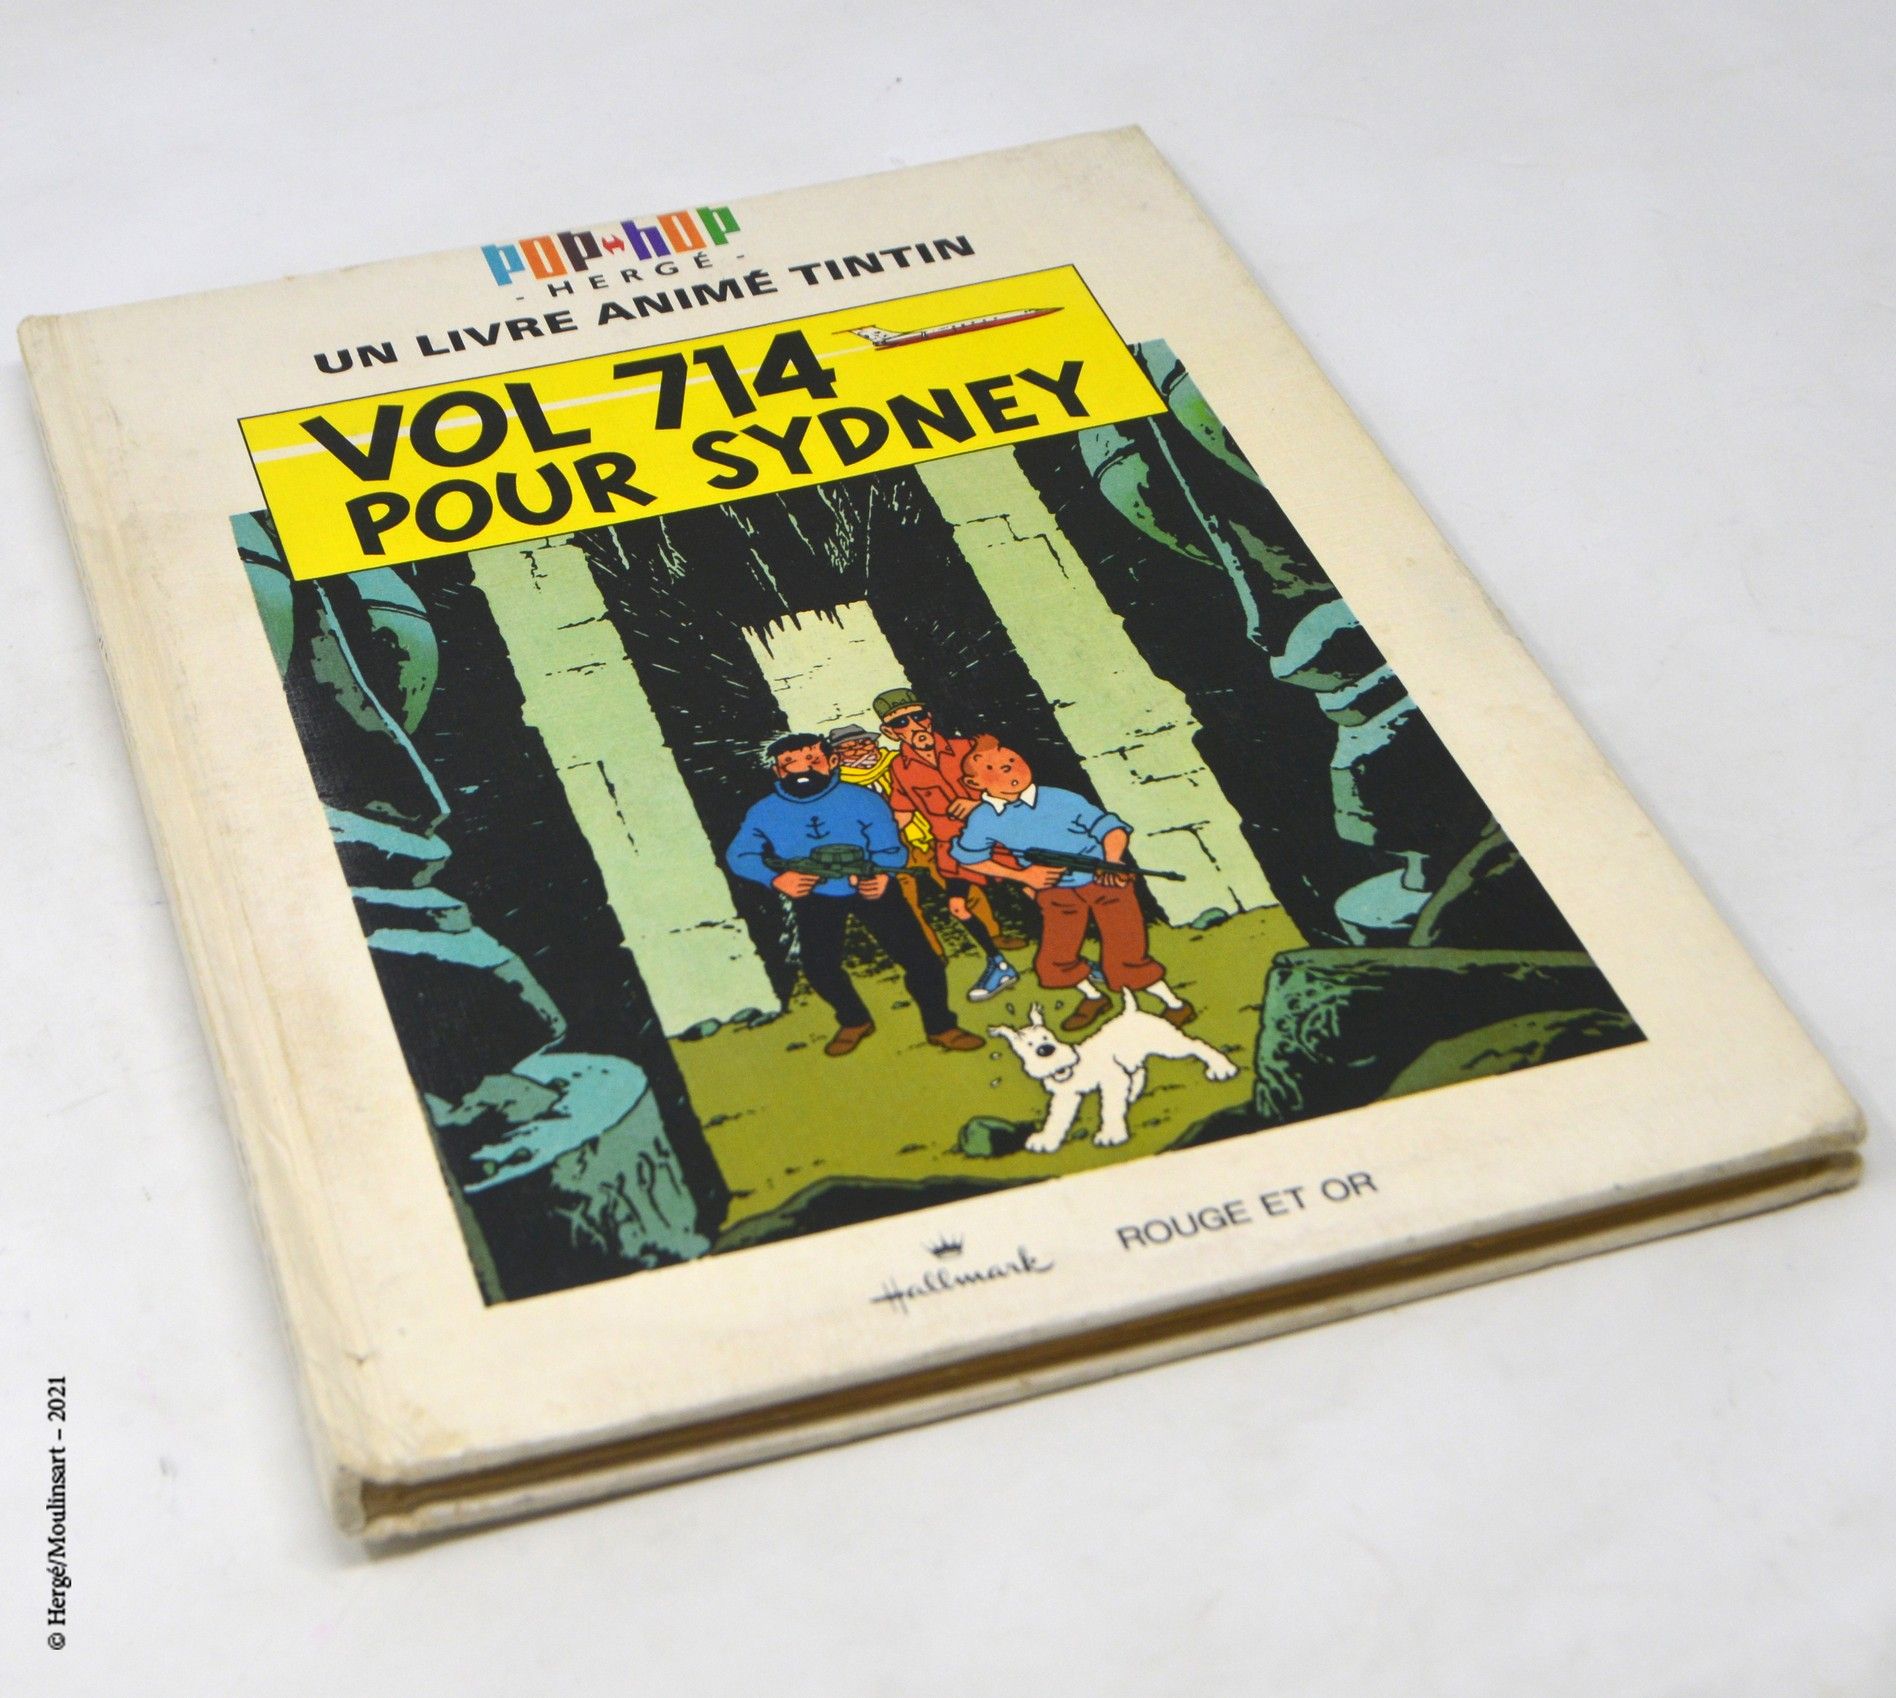 Vol 714 pour Sidney HERGÉ/POP UP

Pop-up book. 

Flight 714 to Sidney

Red and G&hellip;